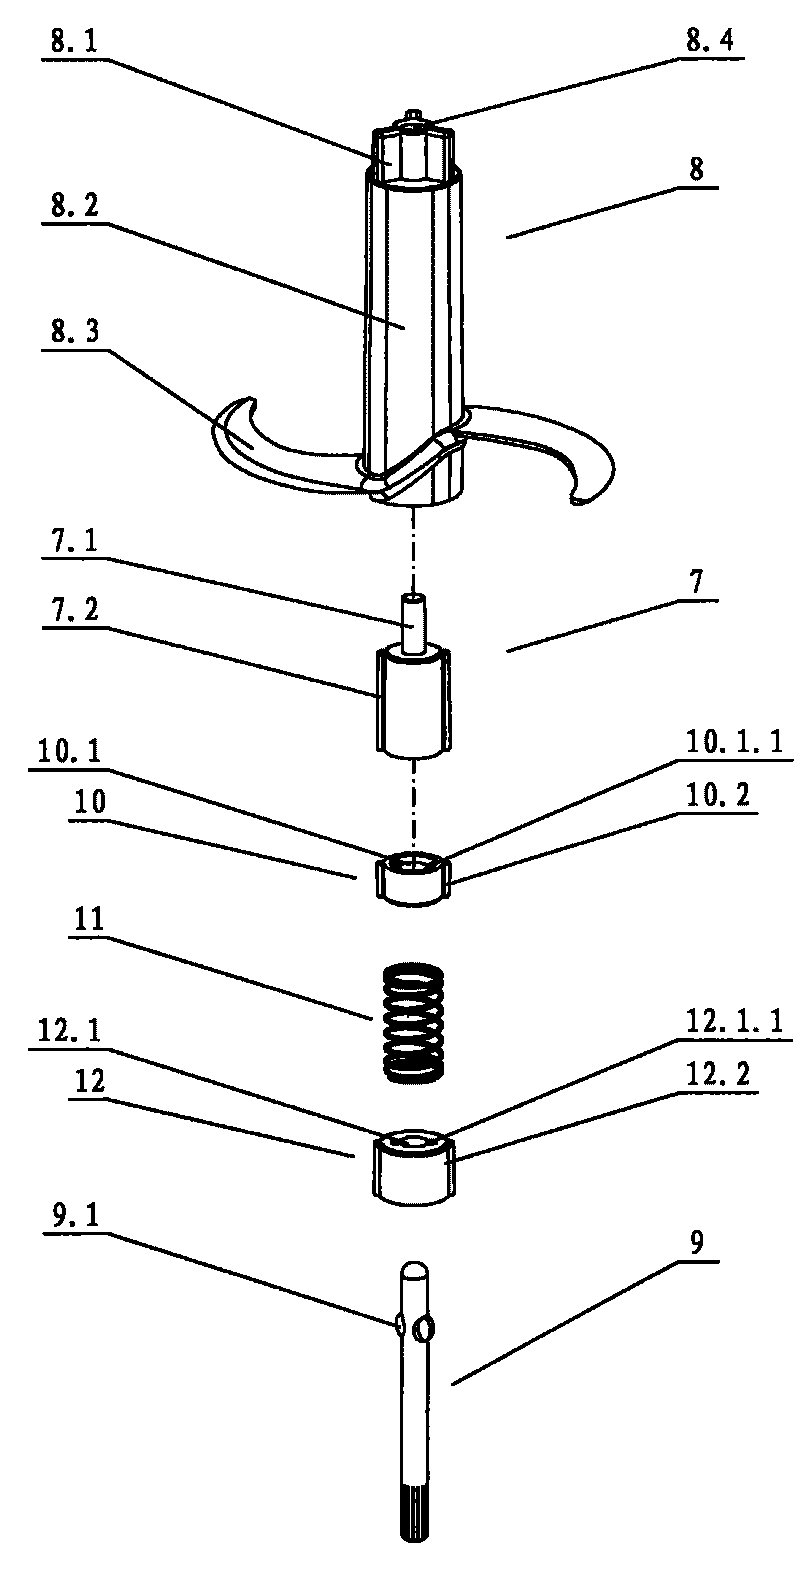 Self-locking engaging and disengaging gear for cutter of mixing cup